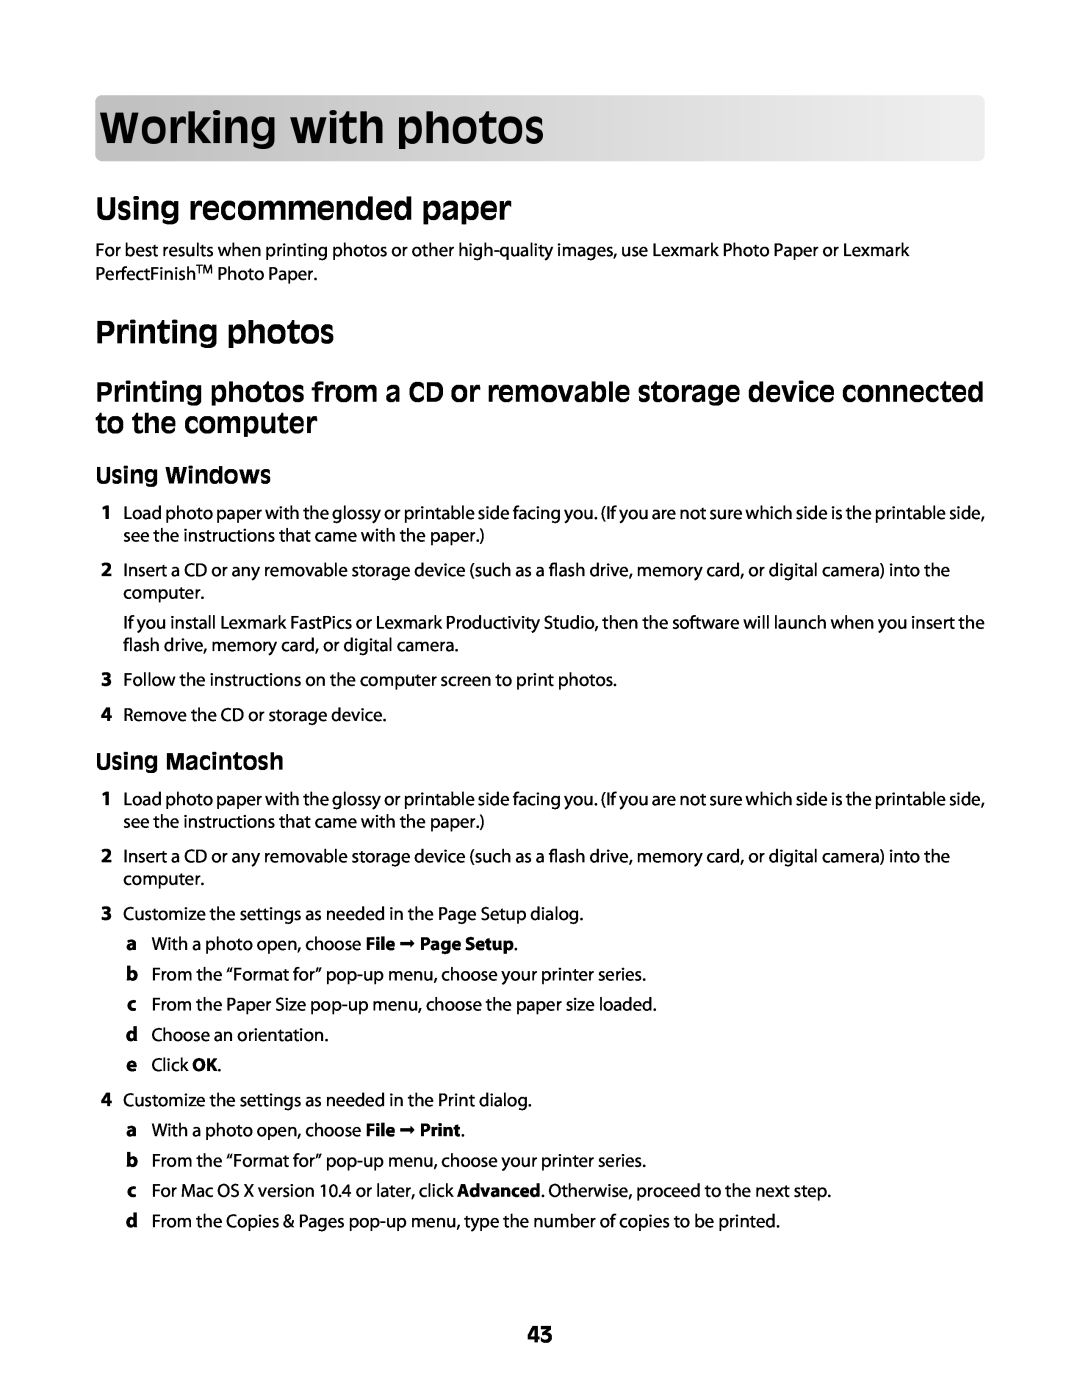 Lexmark Z2400 Series manual Workingwithphotos, Using recommended paper, Printing photos, Using Windows, Using Macintosh 